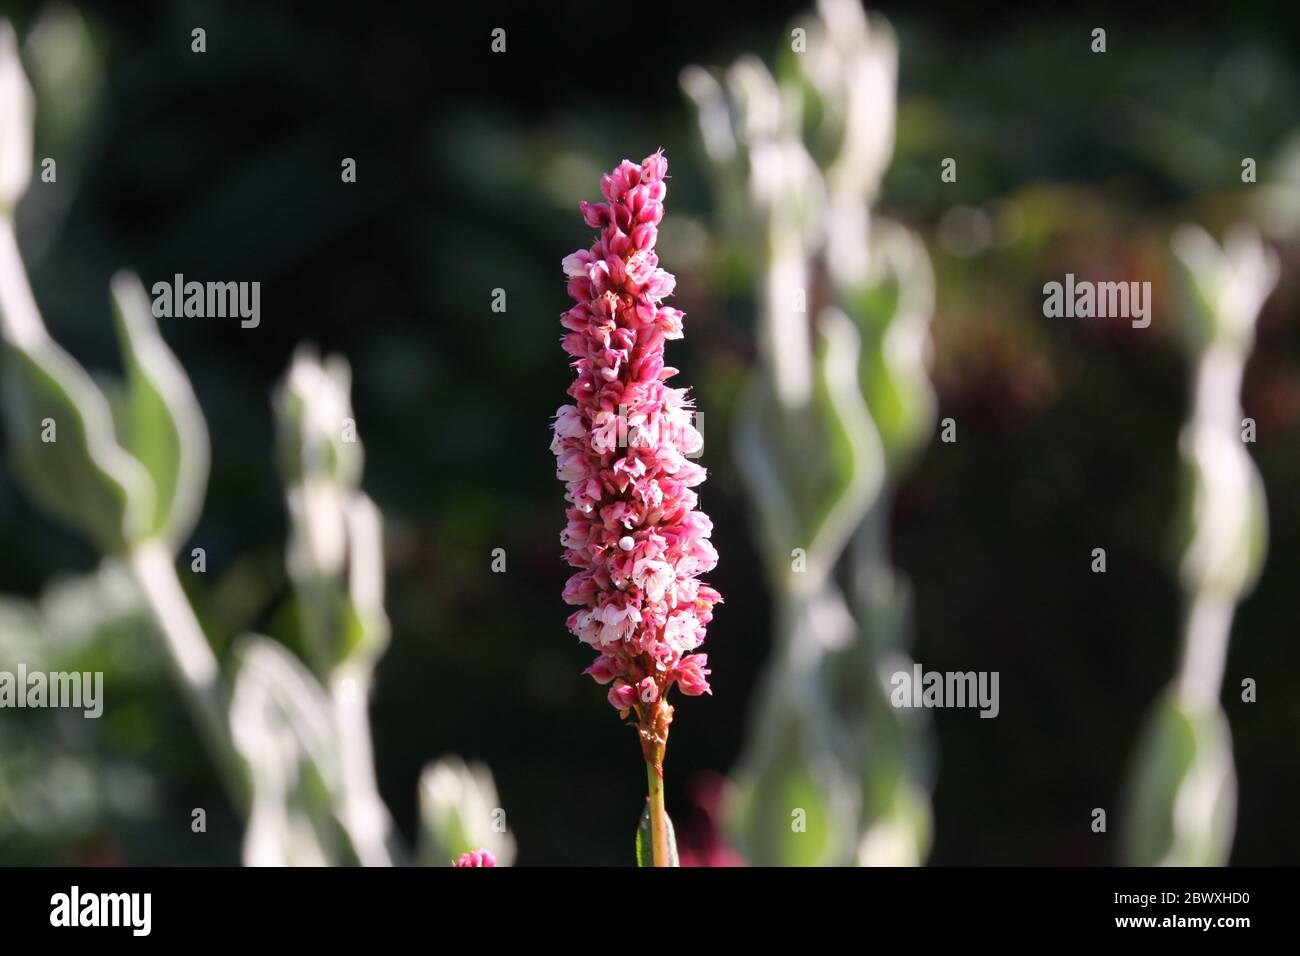 Close up of pink flowers of the knotweed Bistorta affinis superbum in the morning light, in front of blurred background in a country garden Stock Photo